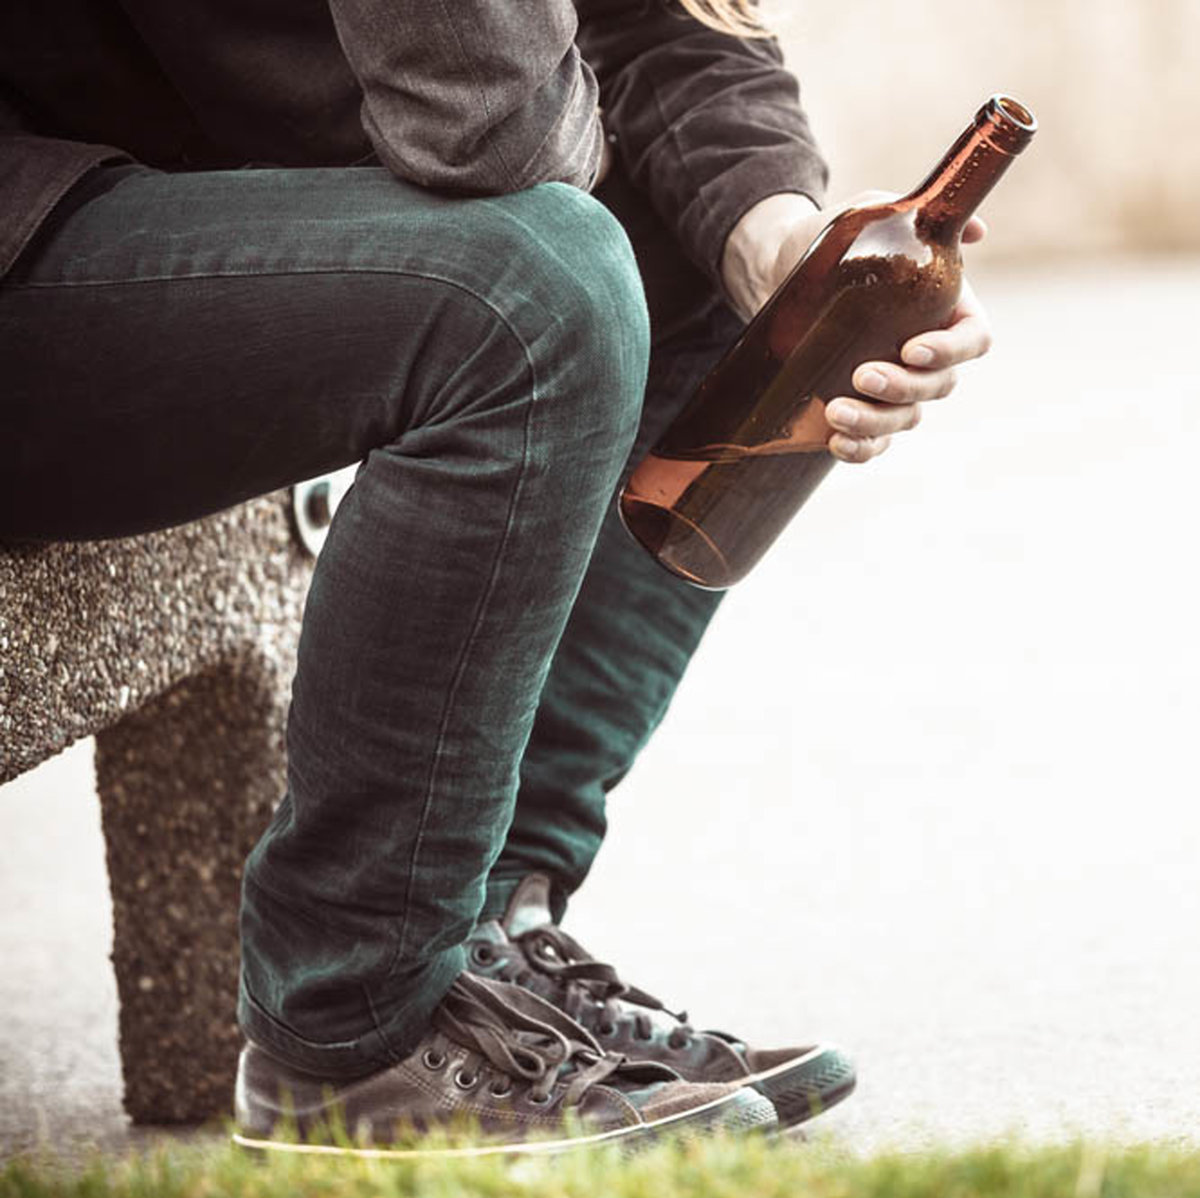 Man drinking alcohol on a bench